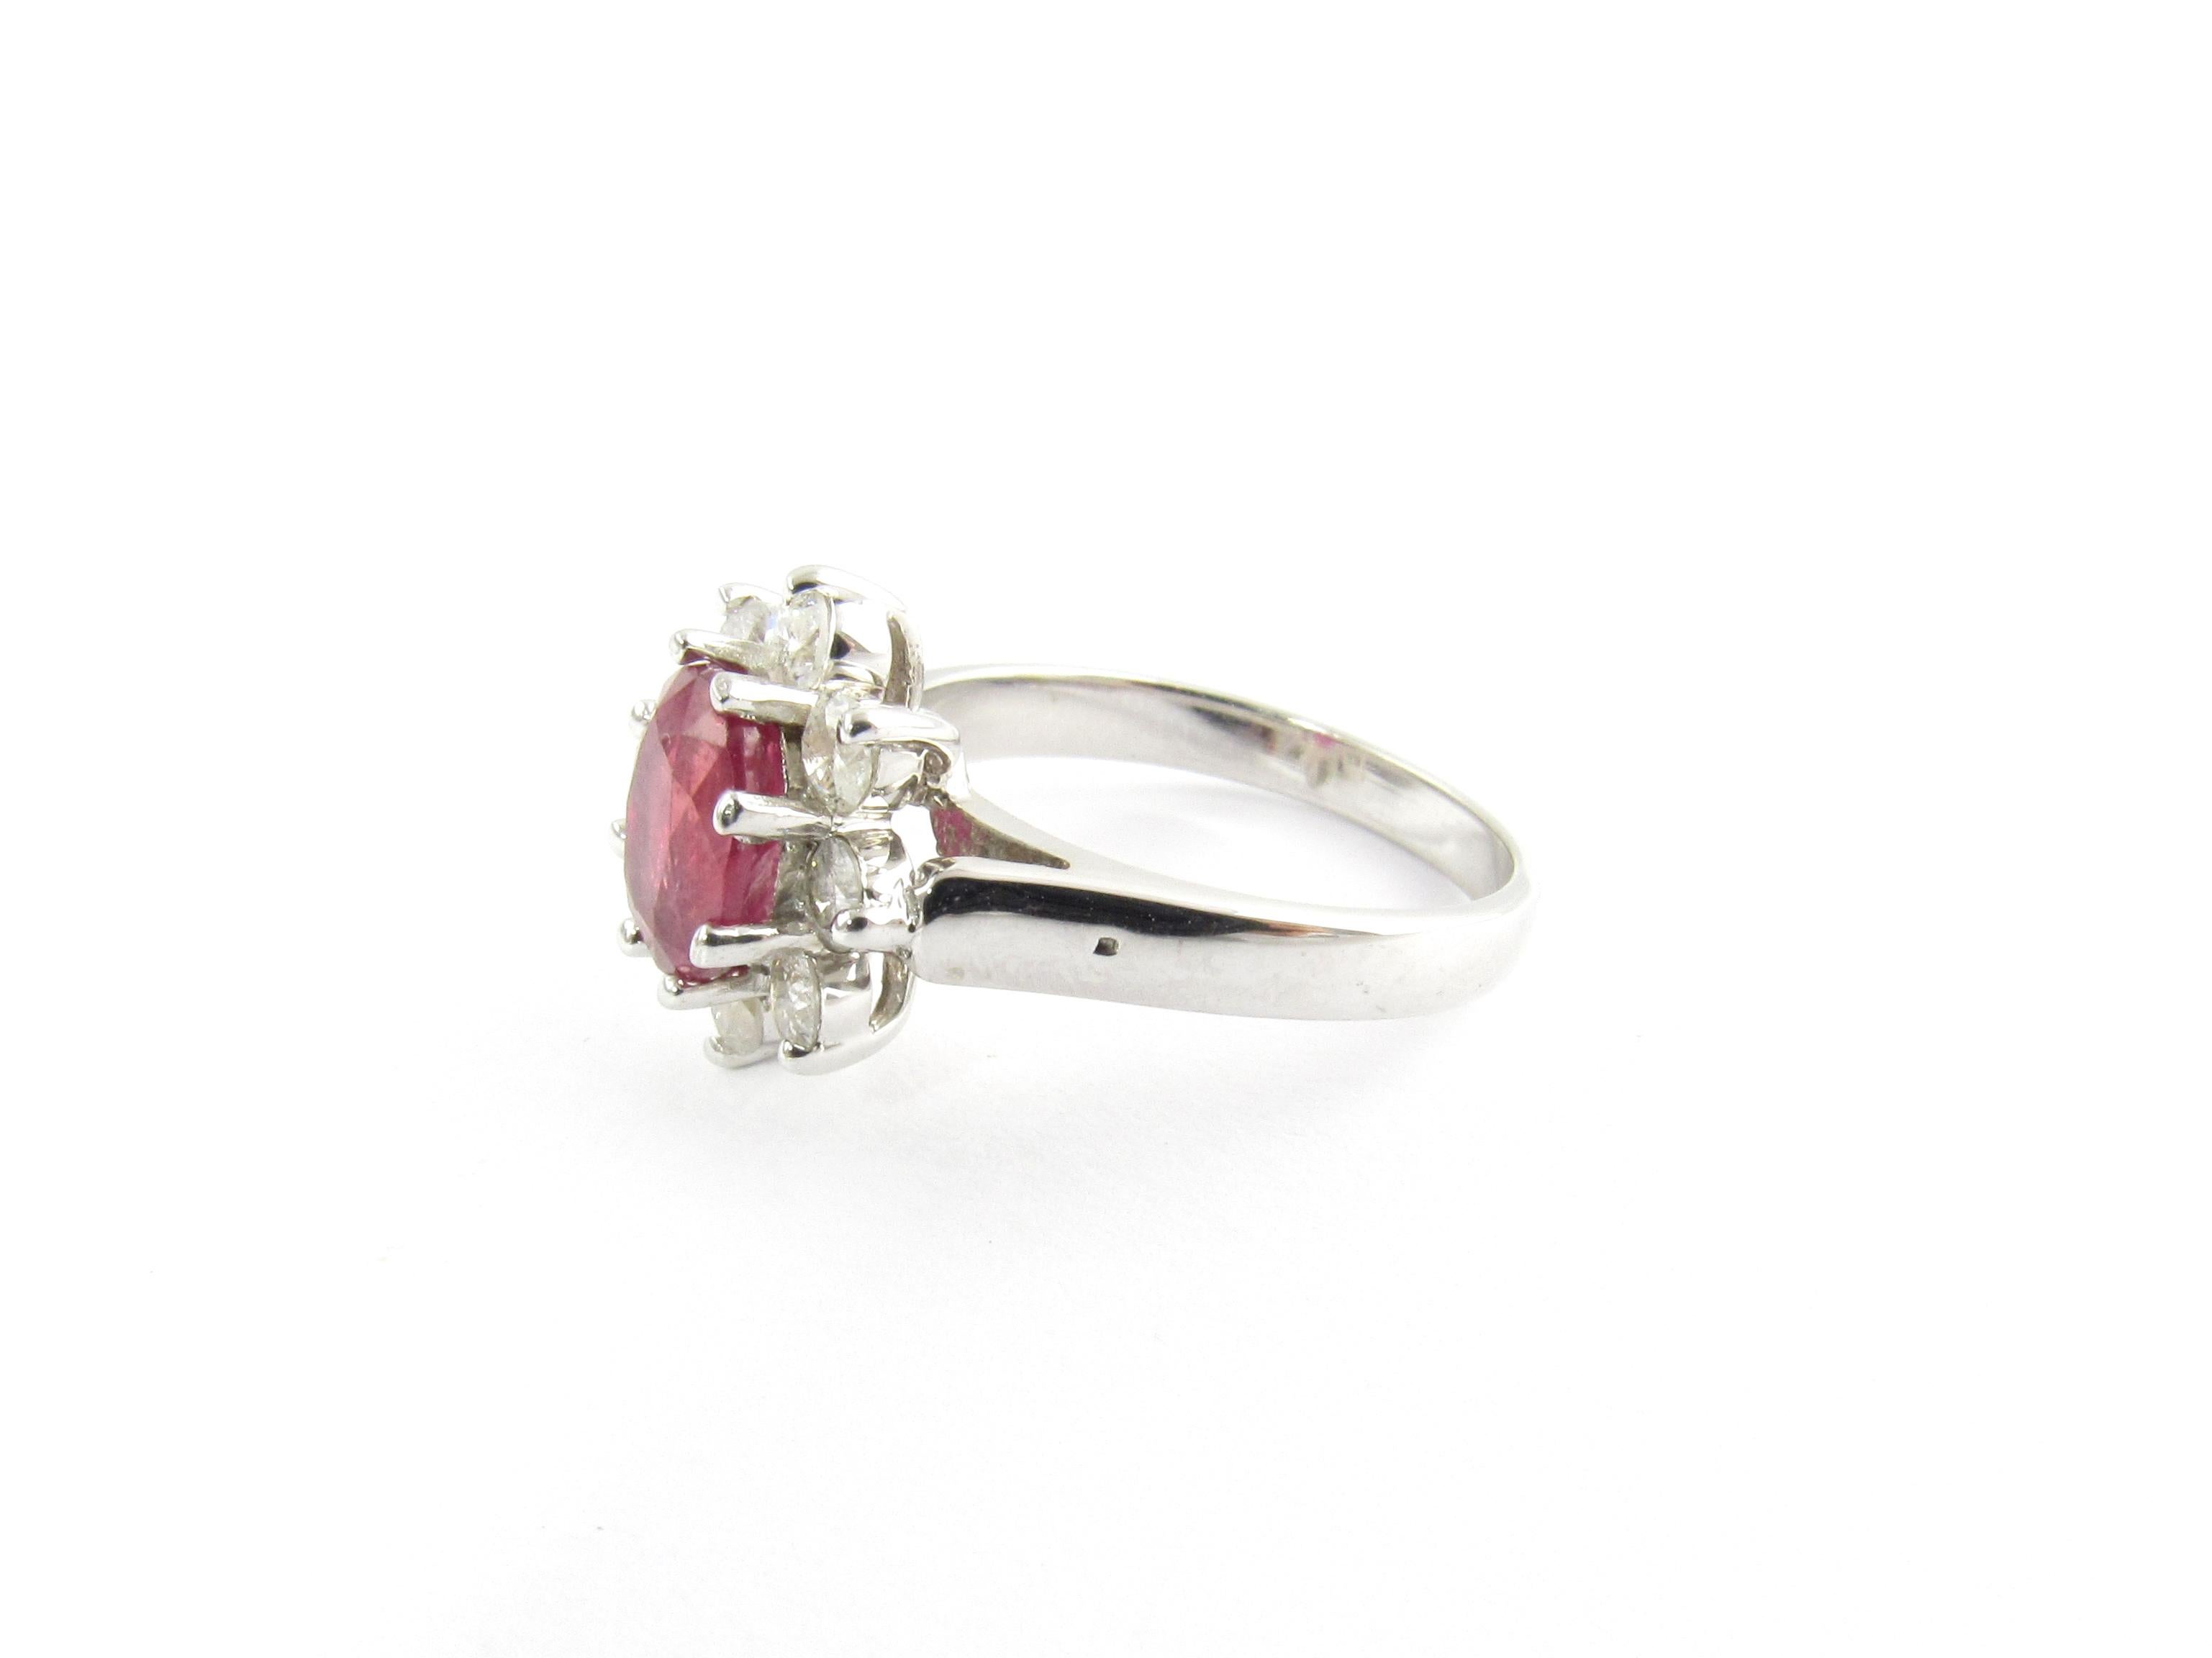 Vintage 14 Karat White Gold Natural Ruby and Diamond Ring Size

This stunning ring features one oval ruby (9 mm x 7 mm) surrounded by eight round brilliant diamonds set in classic 14K white gold. Top of ring measures 14 mm x 12 mm. Shank measures 2